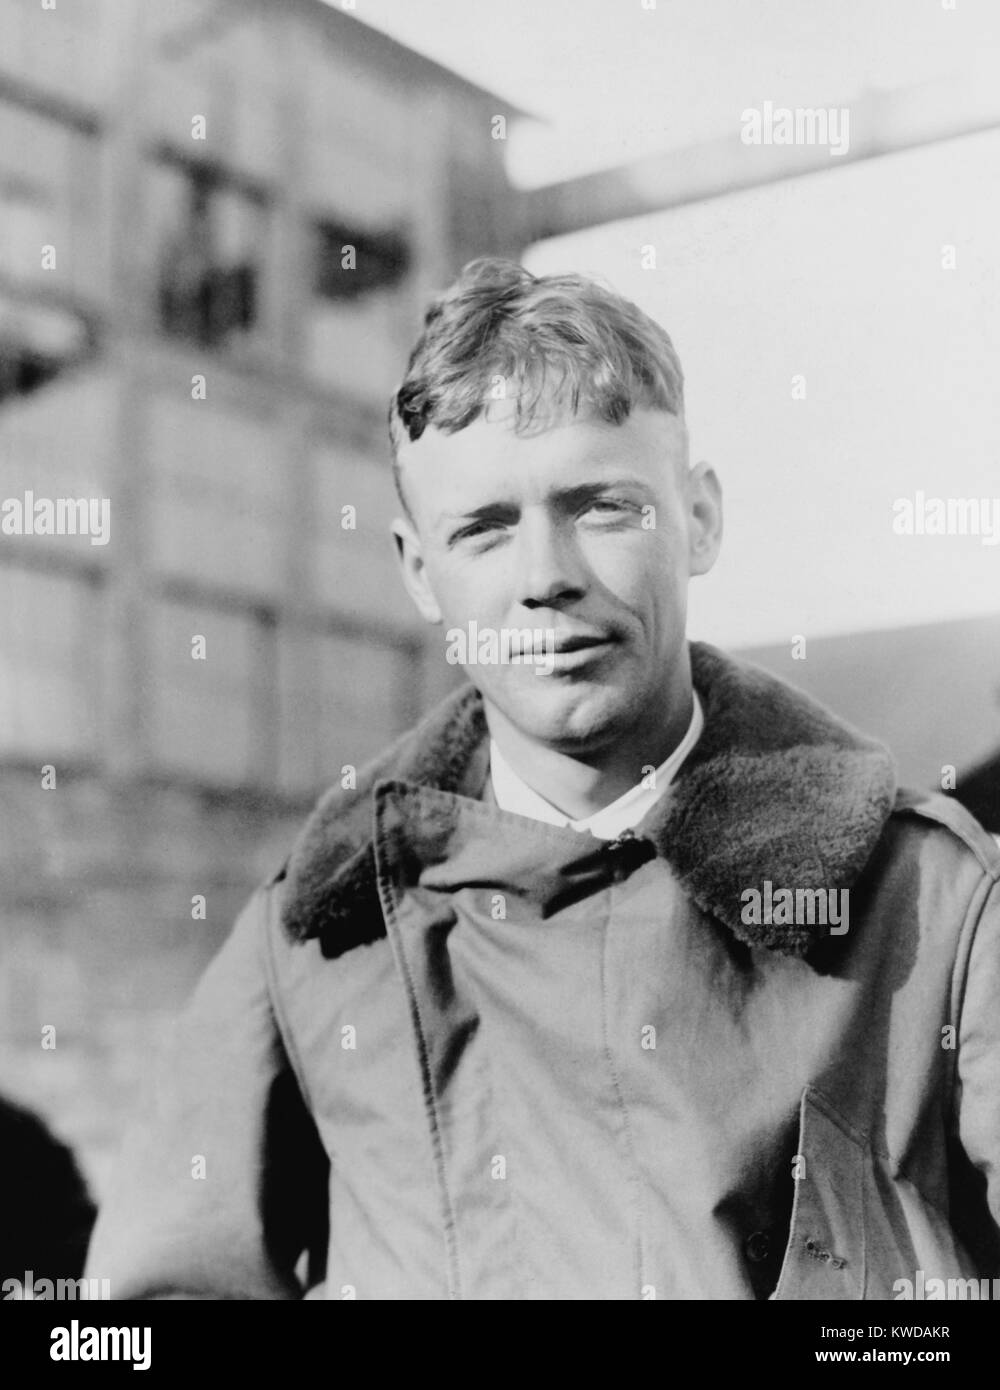 Charles A. Lindbergh at Curtiss Field, Long Island, New York, on May 12, 1927. He arrived three hours ahead of schedule in his flight from St. Louis, Missouri, in his Ryan Monoplane, Spirit of Saint Louis (BSLOC 2016 10 153) Stock Photo